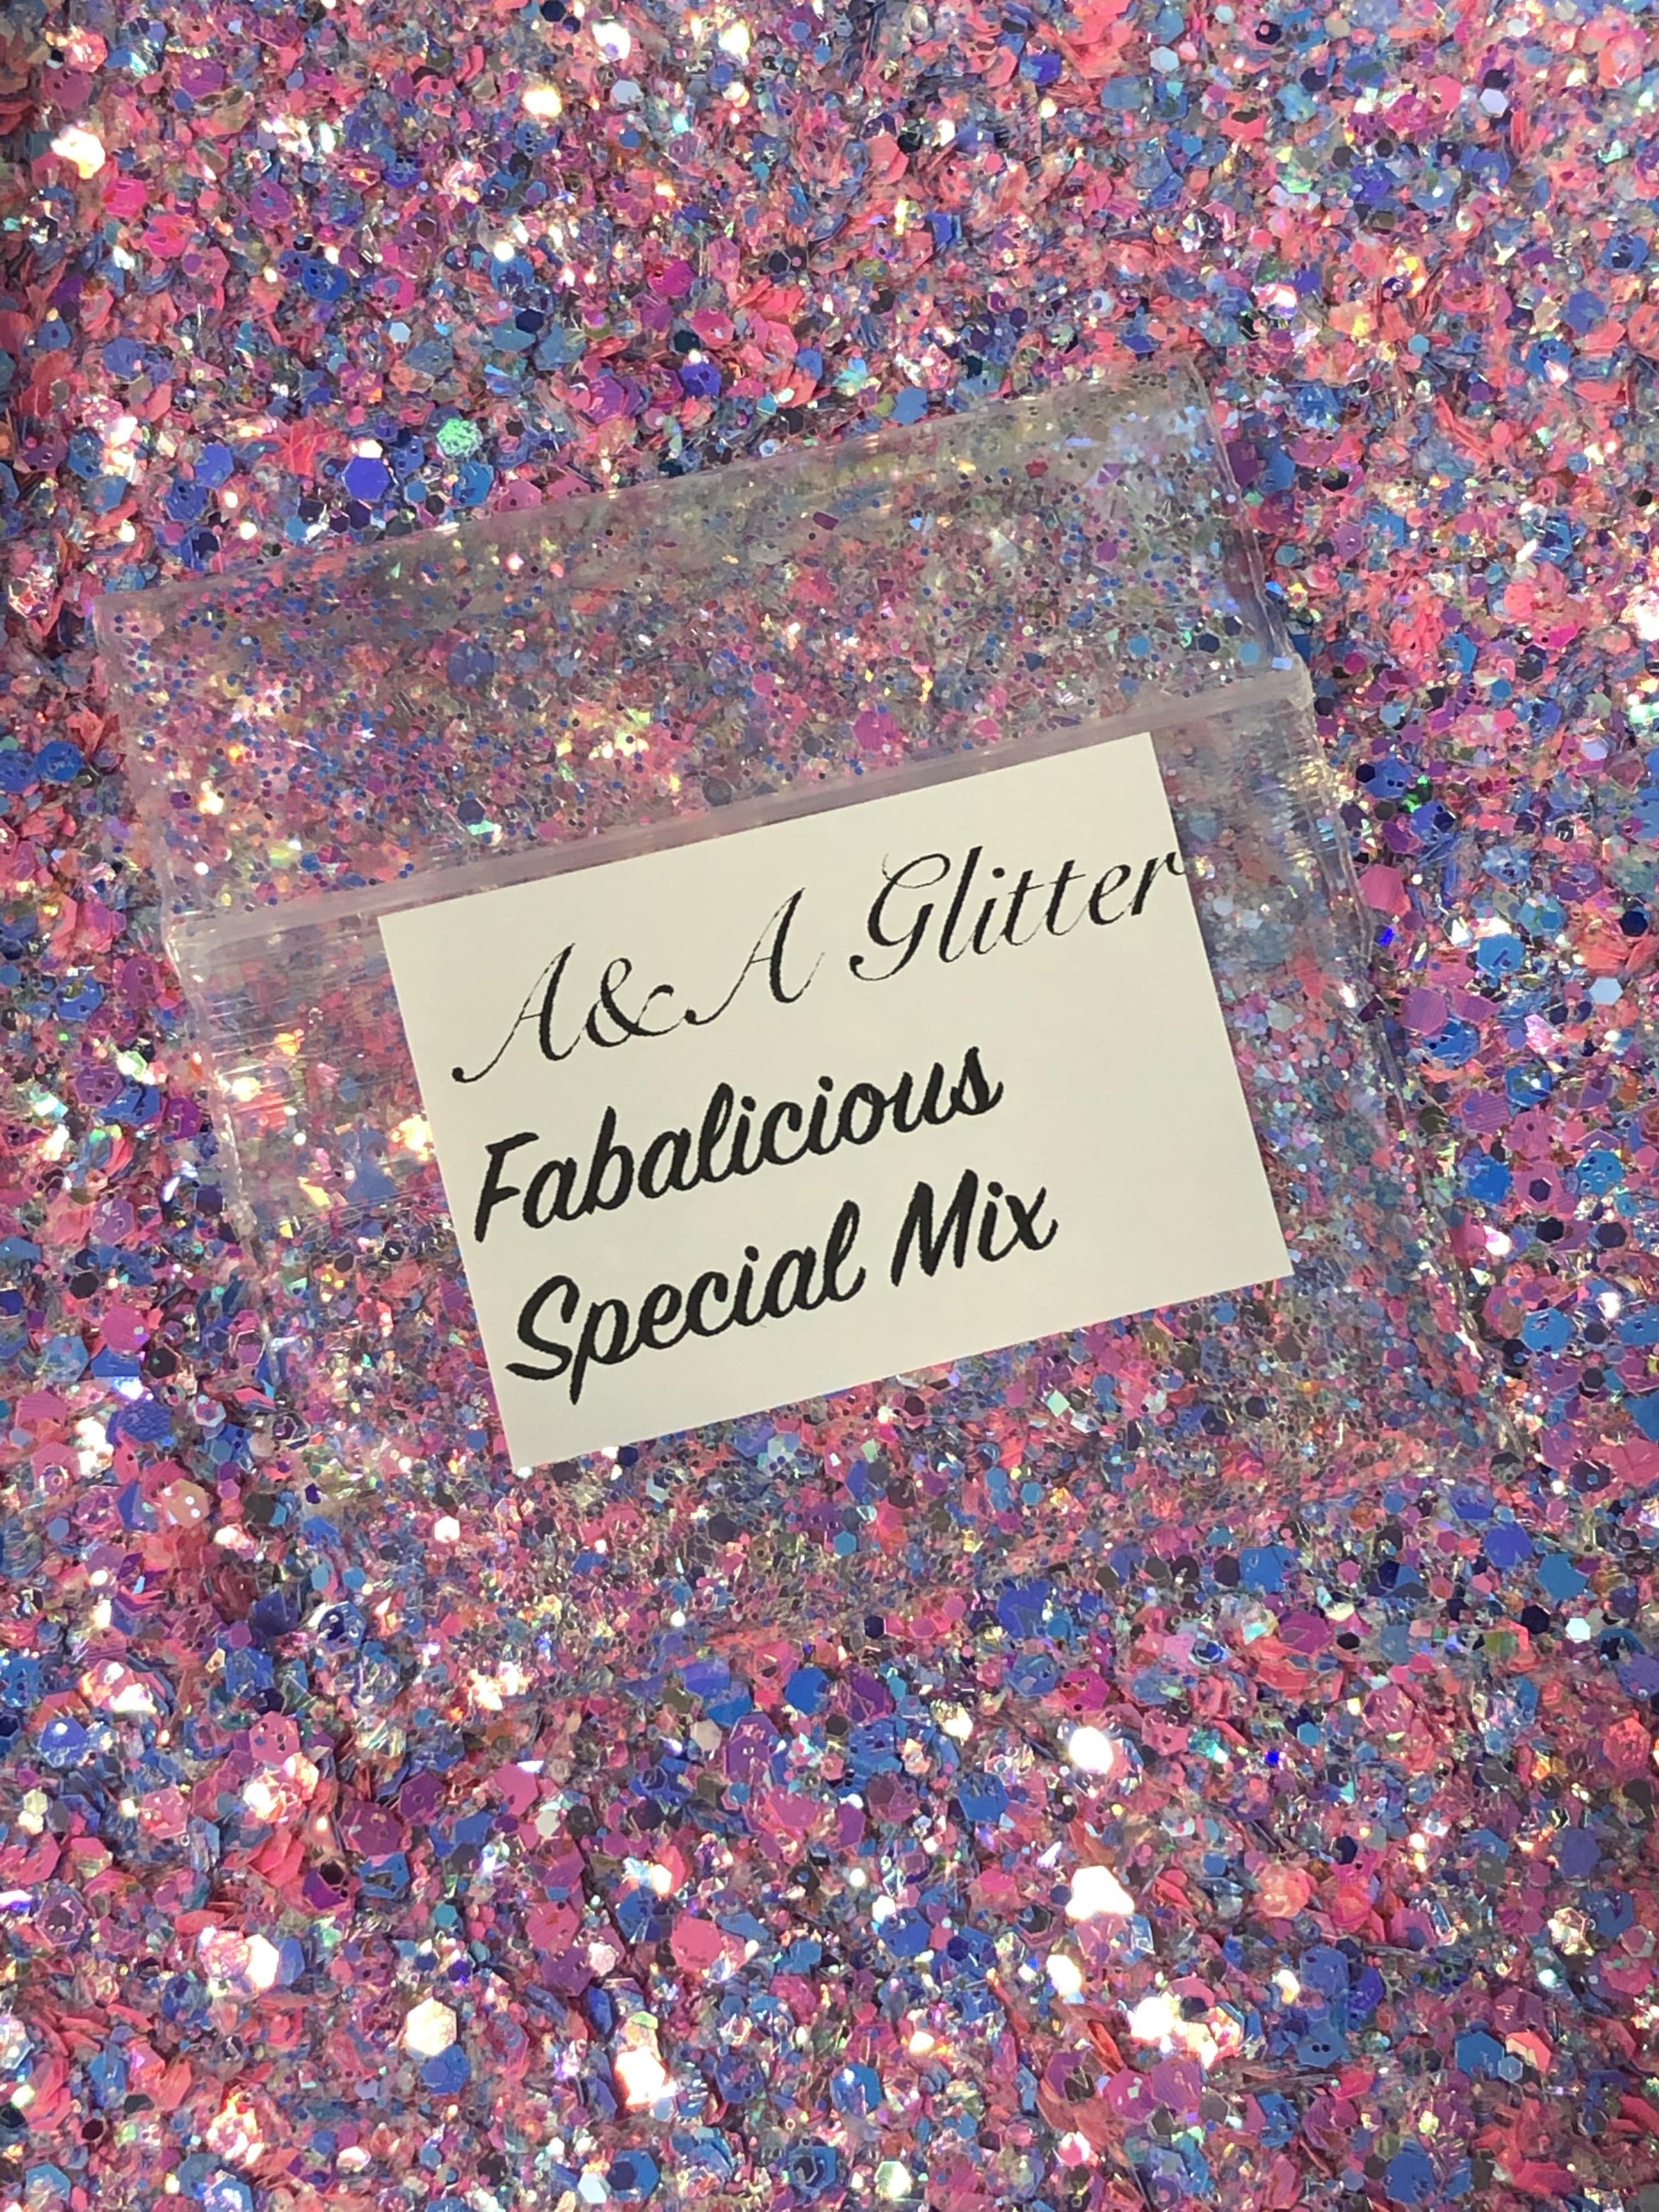 Fabalicious - Special Mix